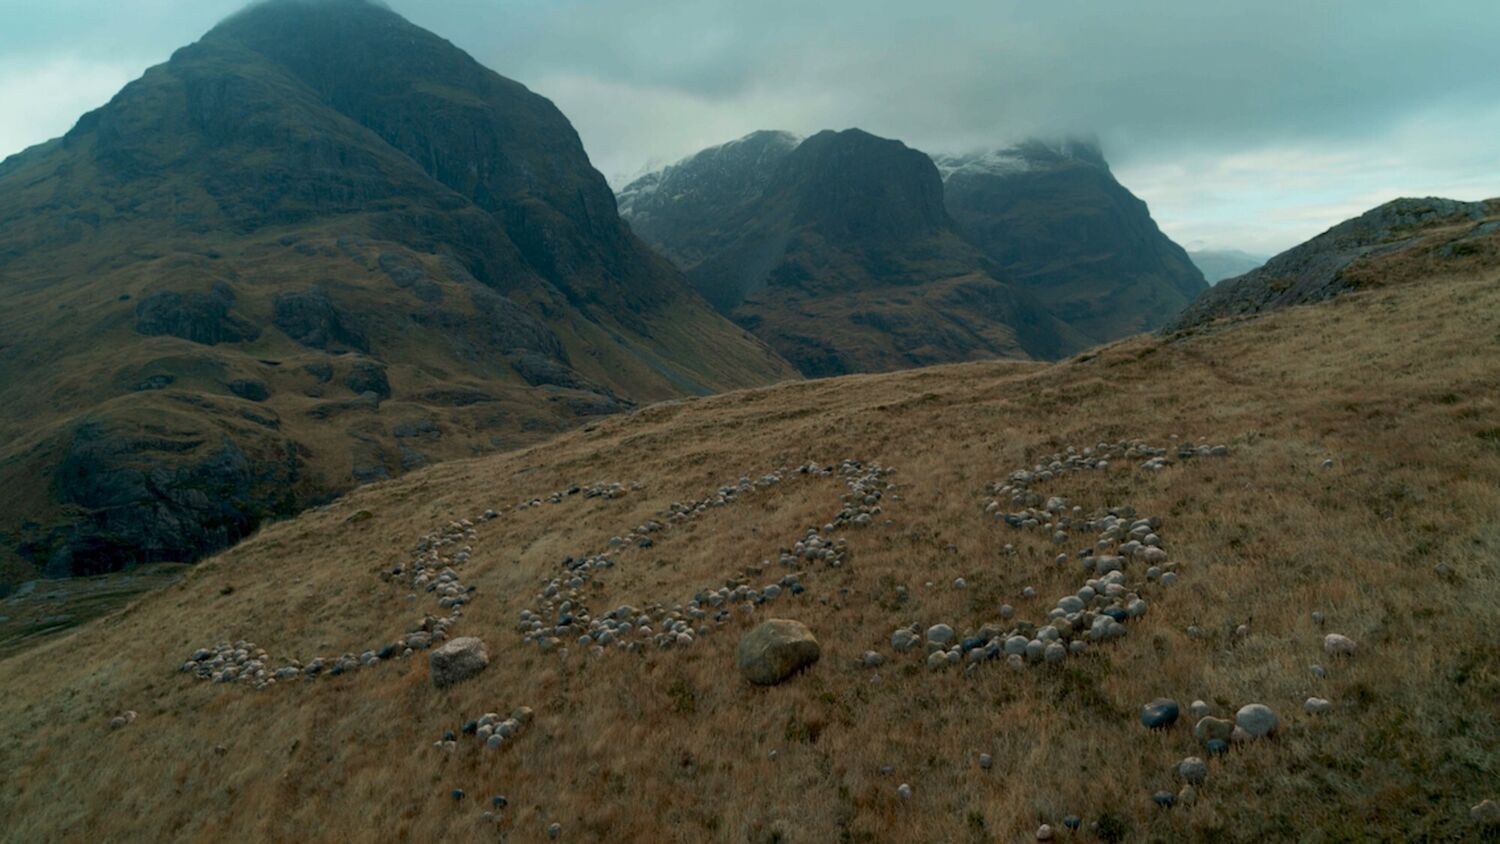 Moody image of Glencoe, with clouds over the mountain tops. In the foreground, on the hillside, are stones set out to spell SOS.